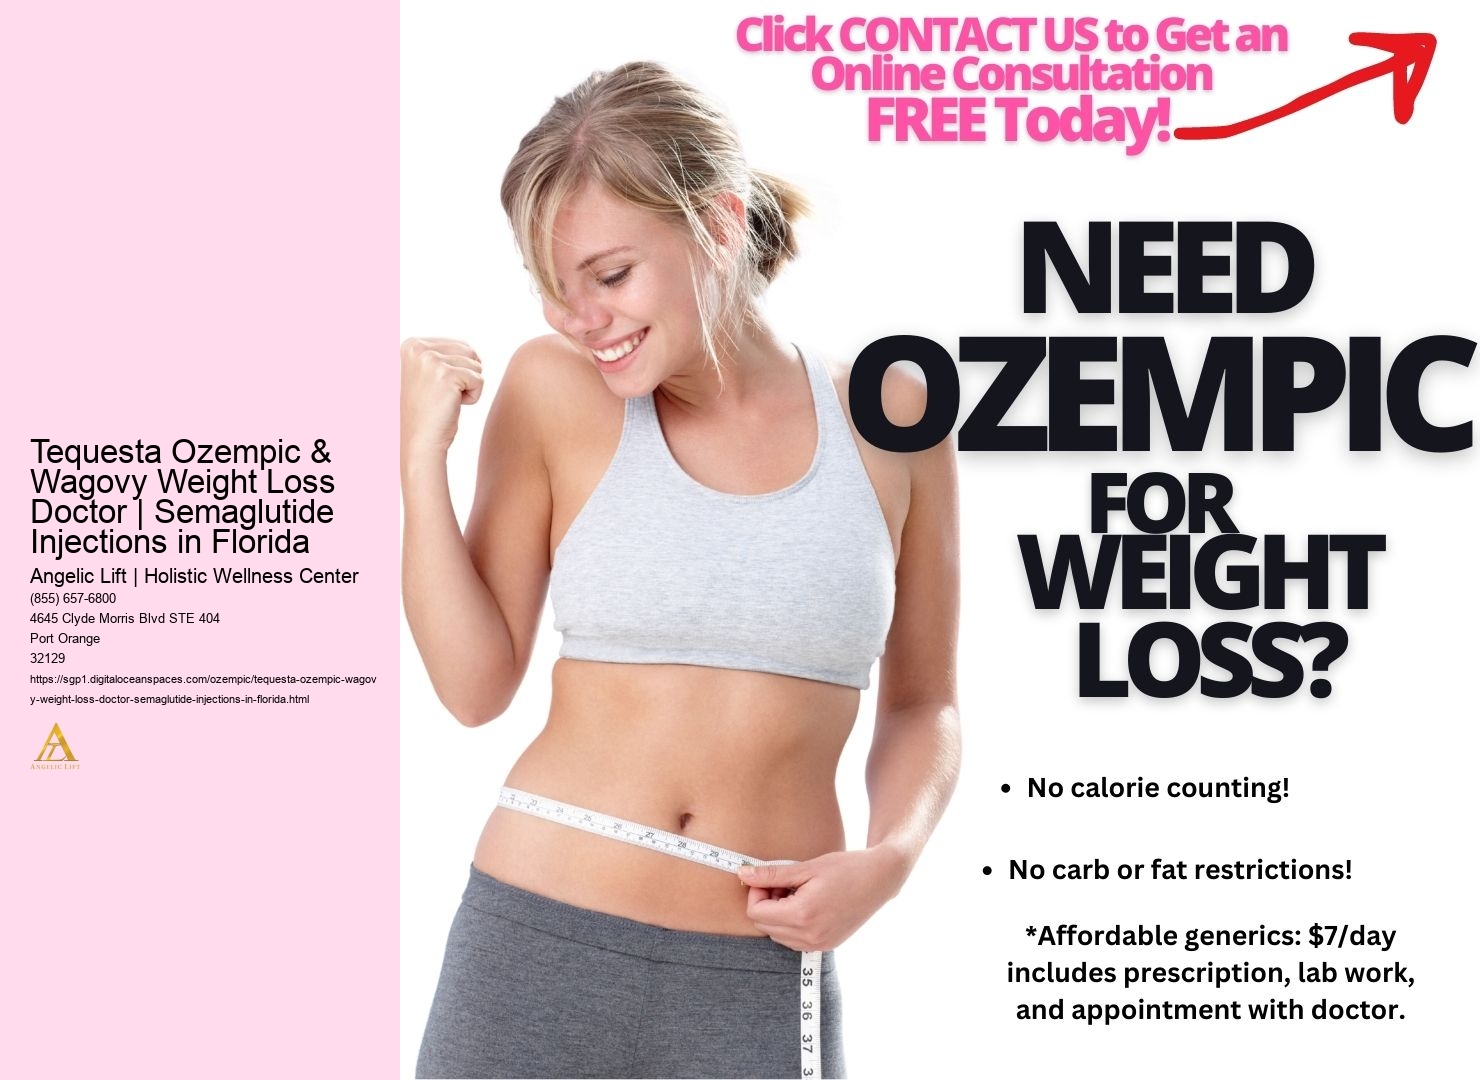 Tequesta Ozempic & Wagovy Weight Loss Doctor | Semaglutide Injections in Florida